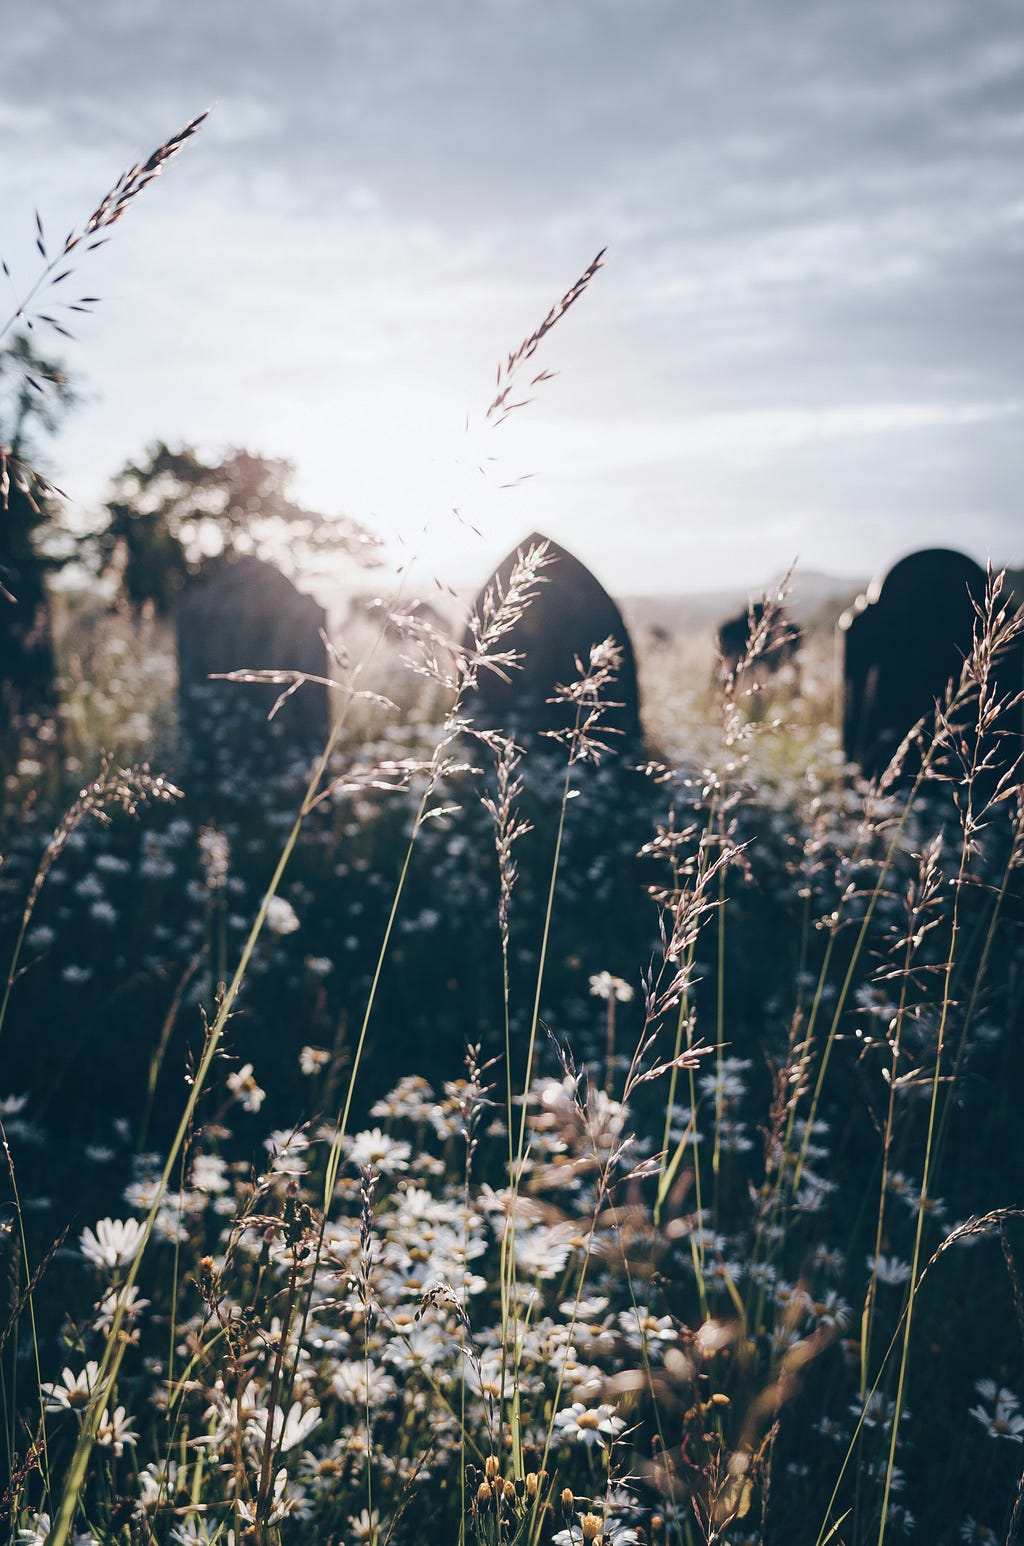 An image of silhouetted grave stones with the sun shining in the background